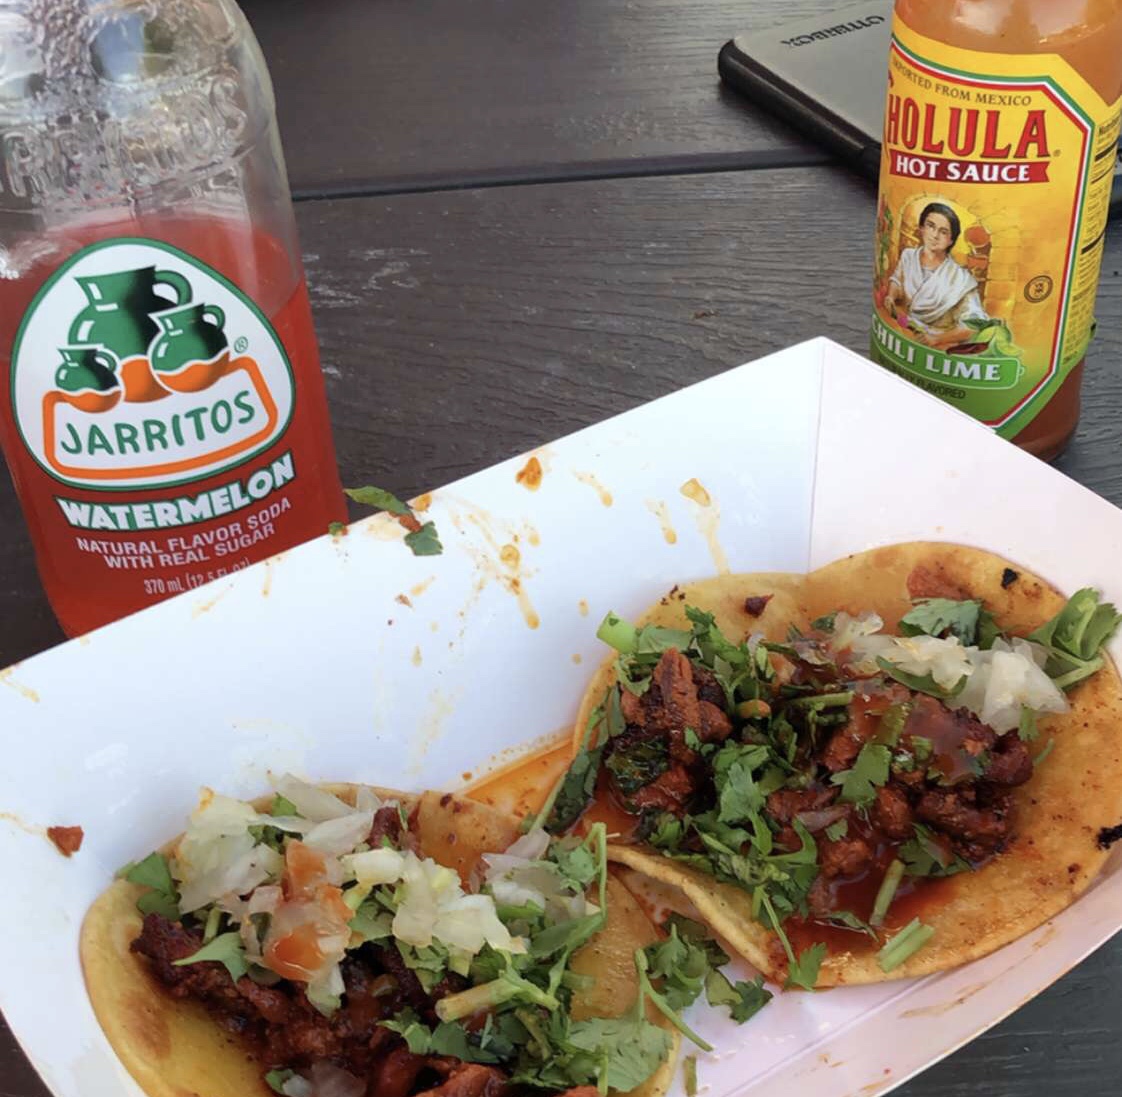 A pair of street tacos with a Jarritos and Cholula Hot Sauce bottle in the background.